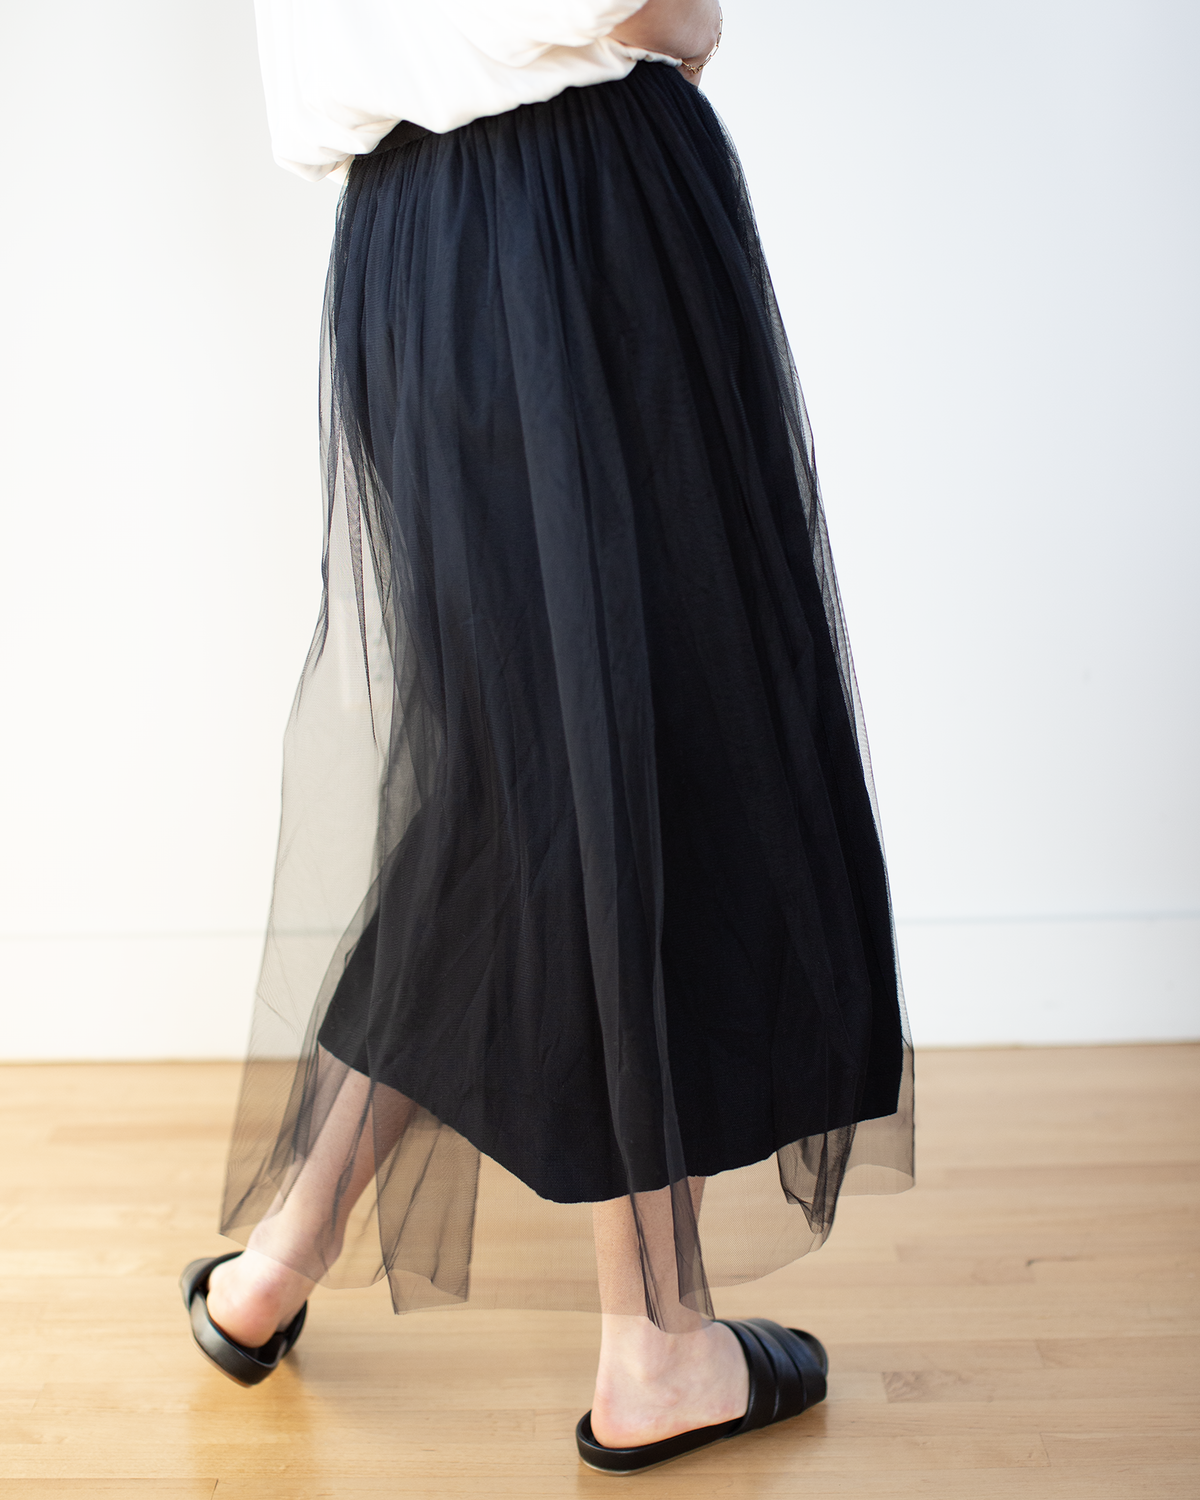 Gathered Skirt w/ Tulle in Black